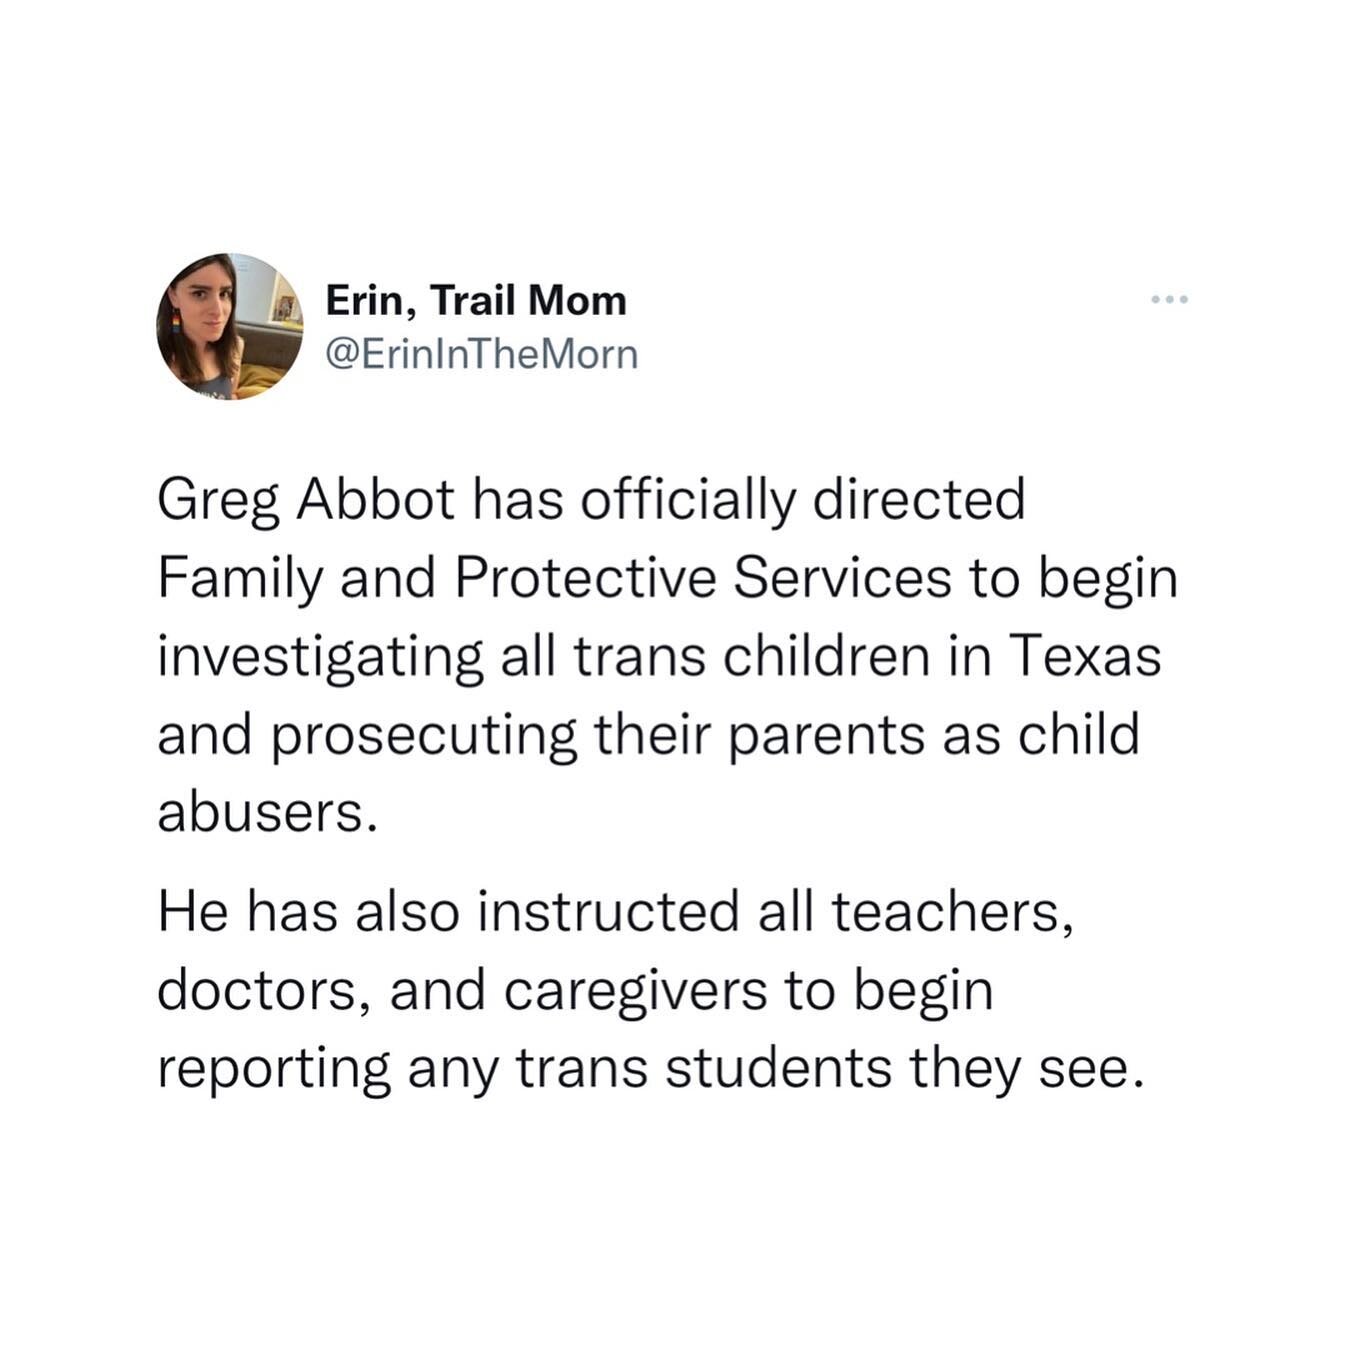 Greg Abbot, you&rsquo;re the devil. This will kill trans youth in your state. This is extremely dangerous and you&rsquo;re abhorrent. WE WILL VOTE YOU OUT

Who thinks it&rsquo;s time for @betoorourke to become Governor? 🤚🏿 🤚🏼🤚🏽

to all 🏳️&zwj;